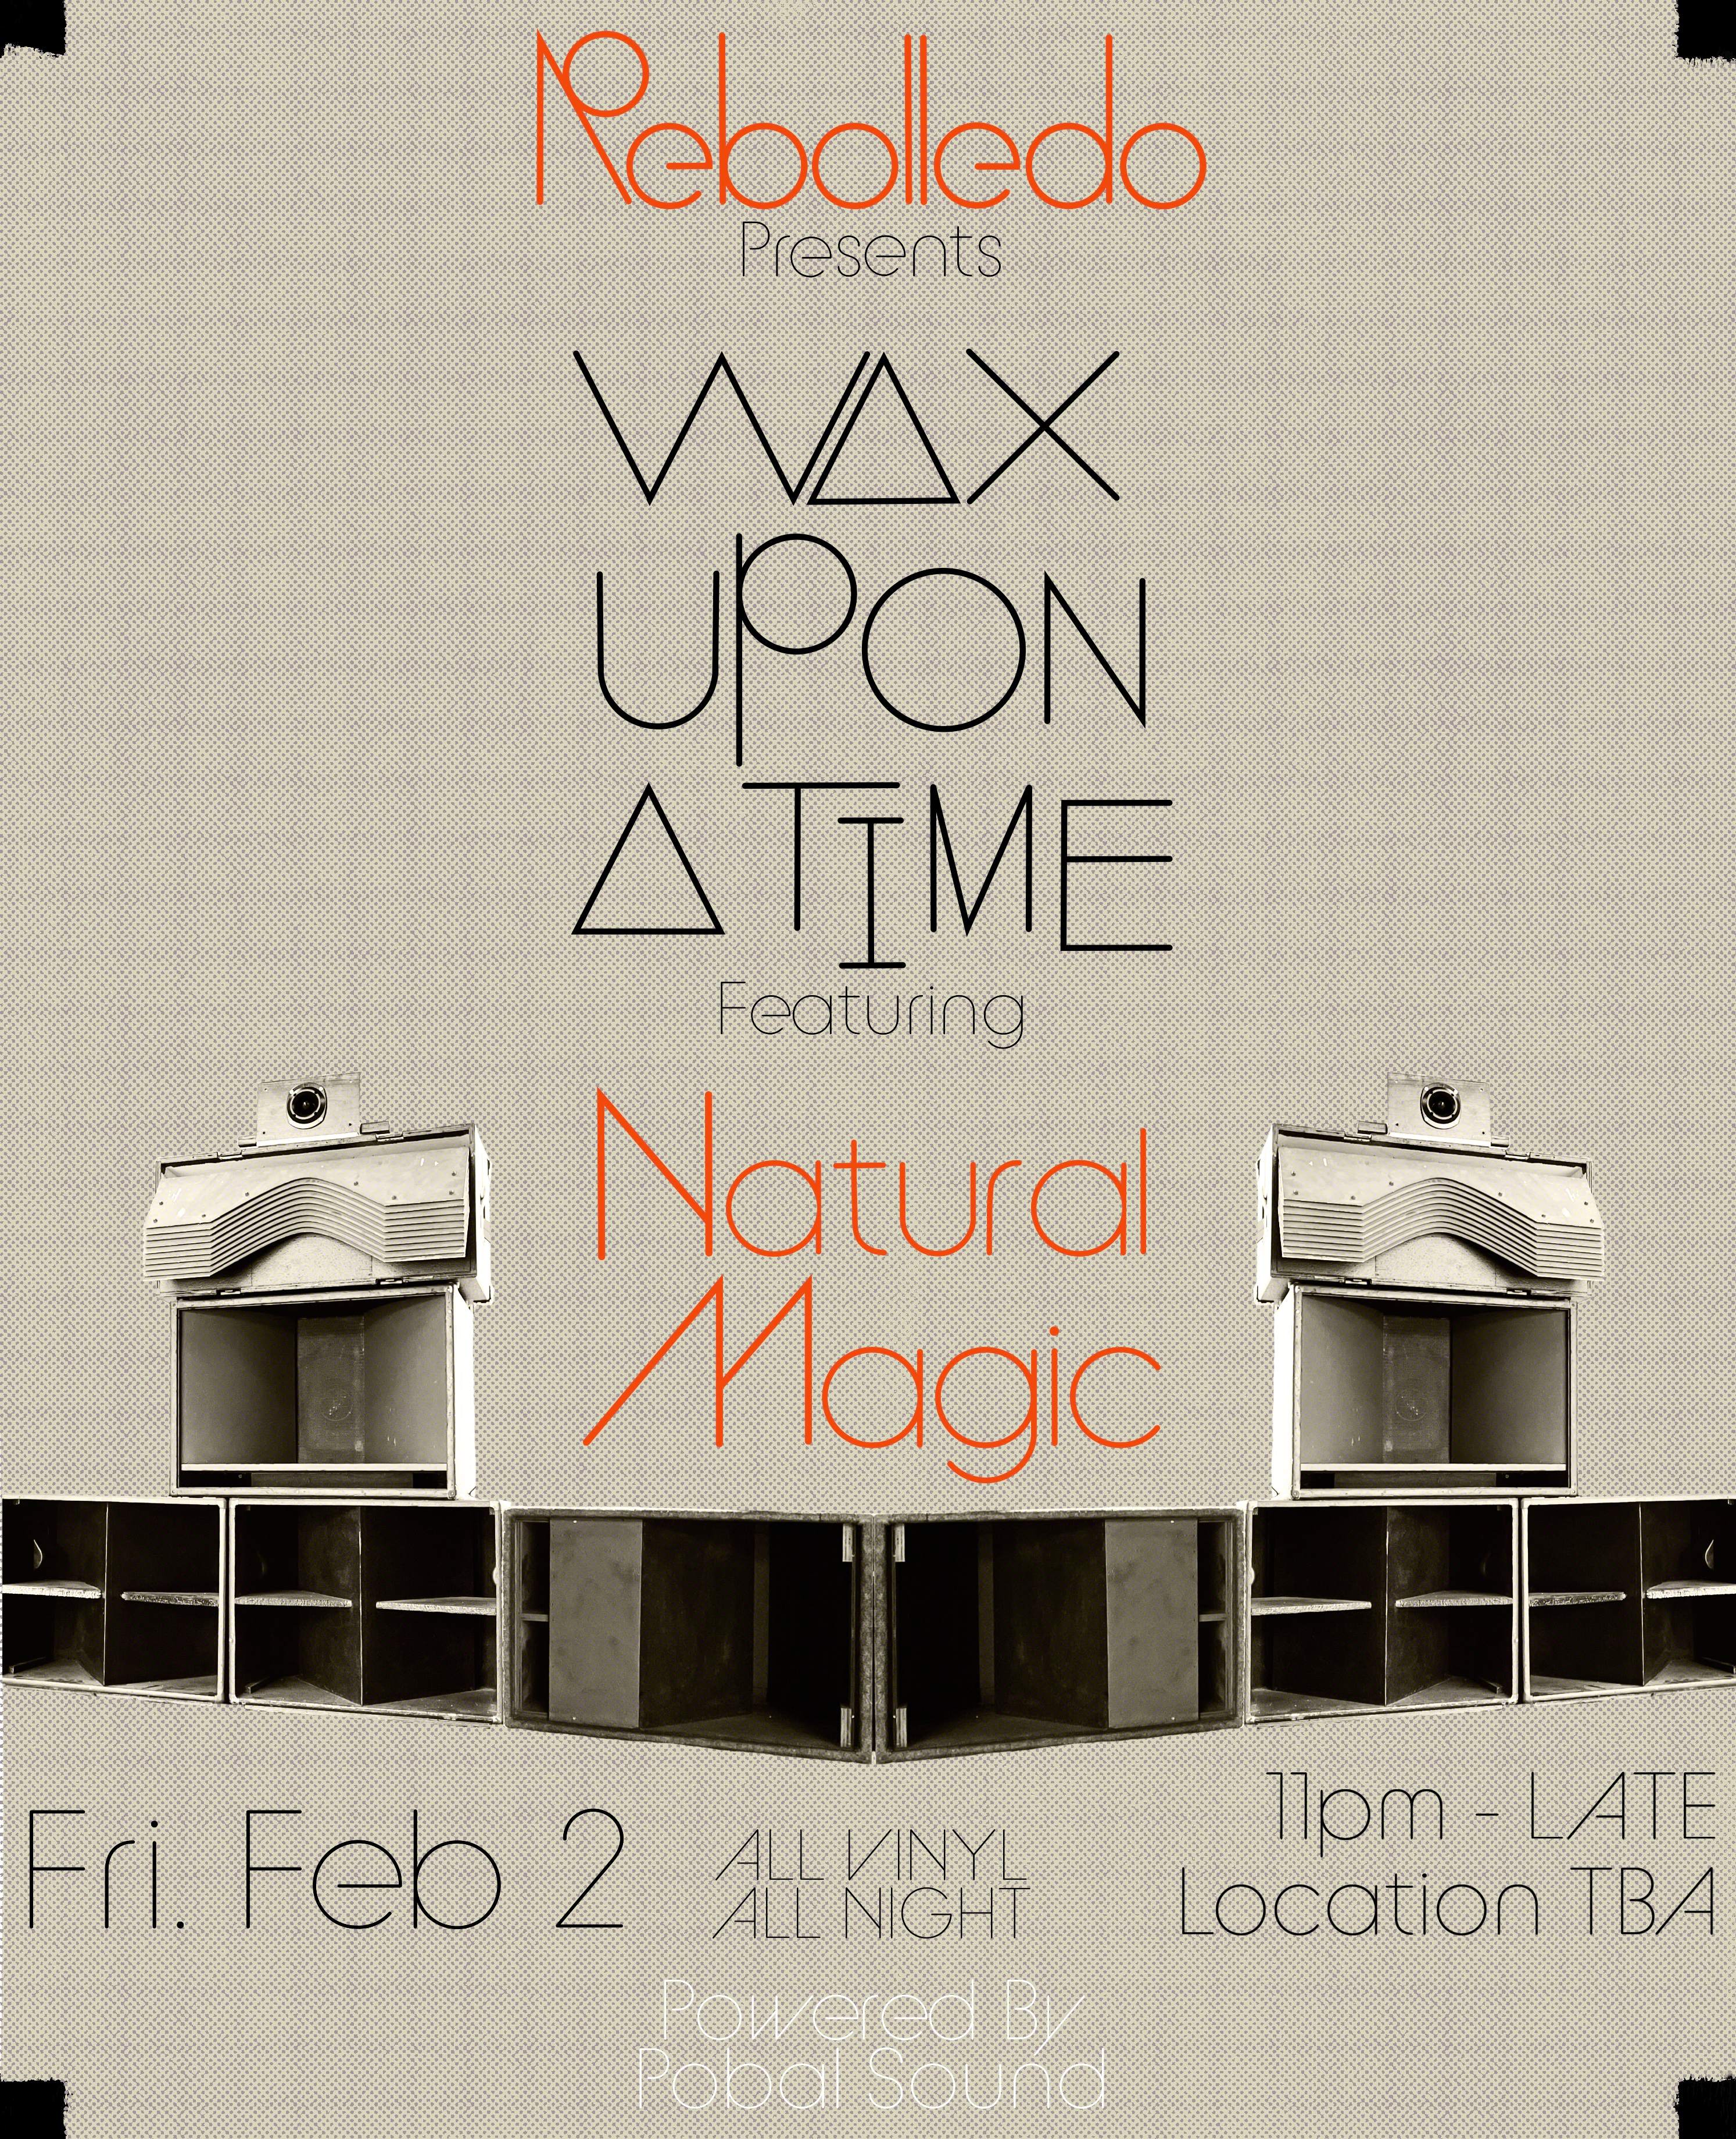 Wax Upon A Time feat. Rebolledo & Natural Magic (ALL NIGHT) - Powered by Pobal Sound - フライヤー表